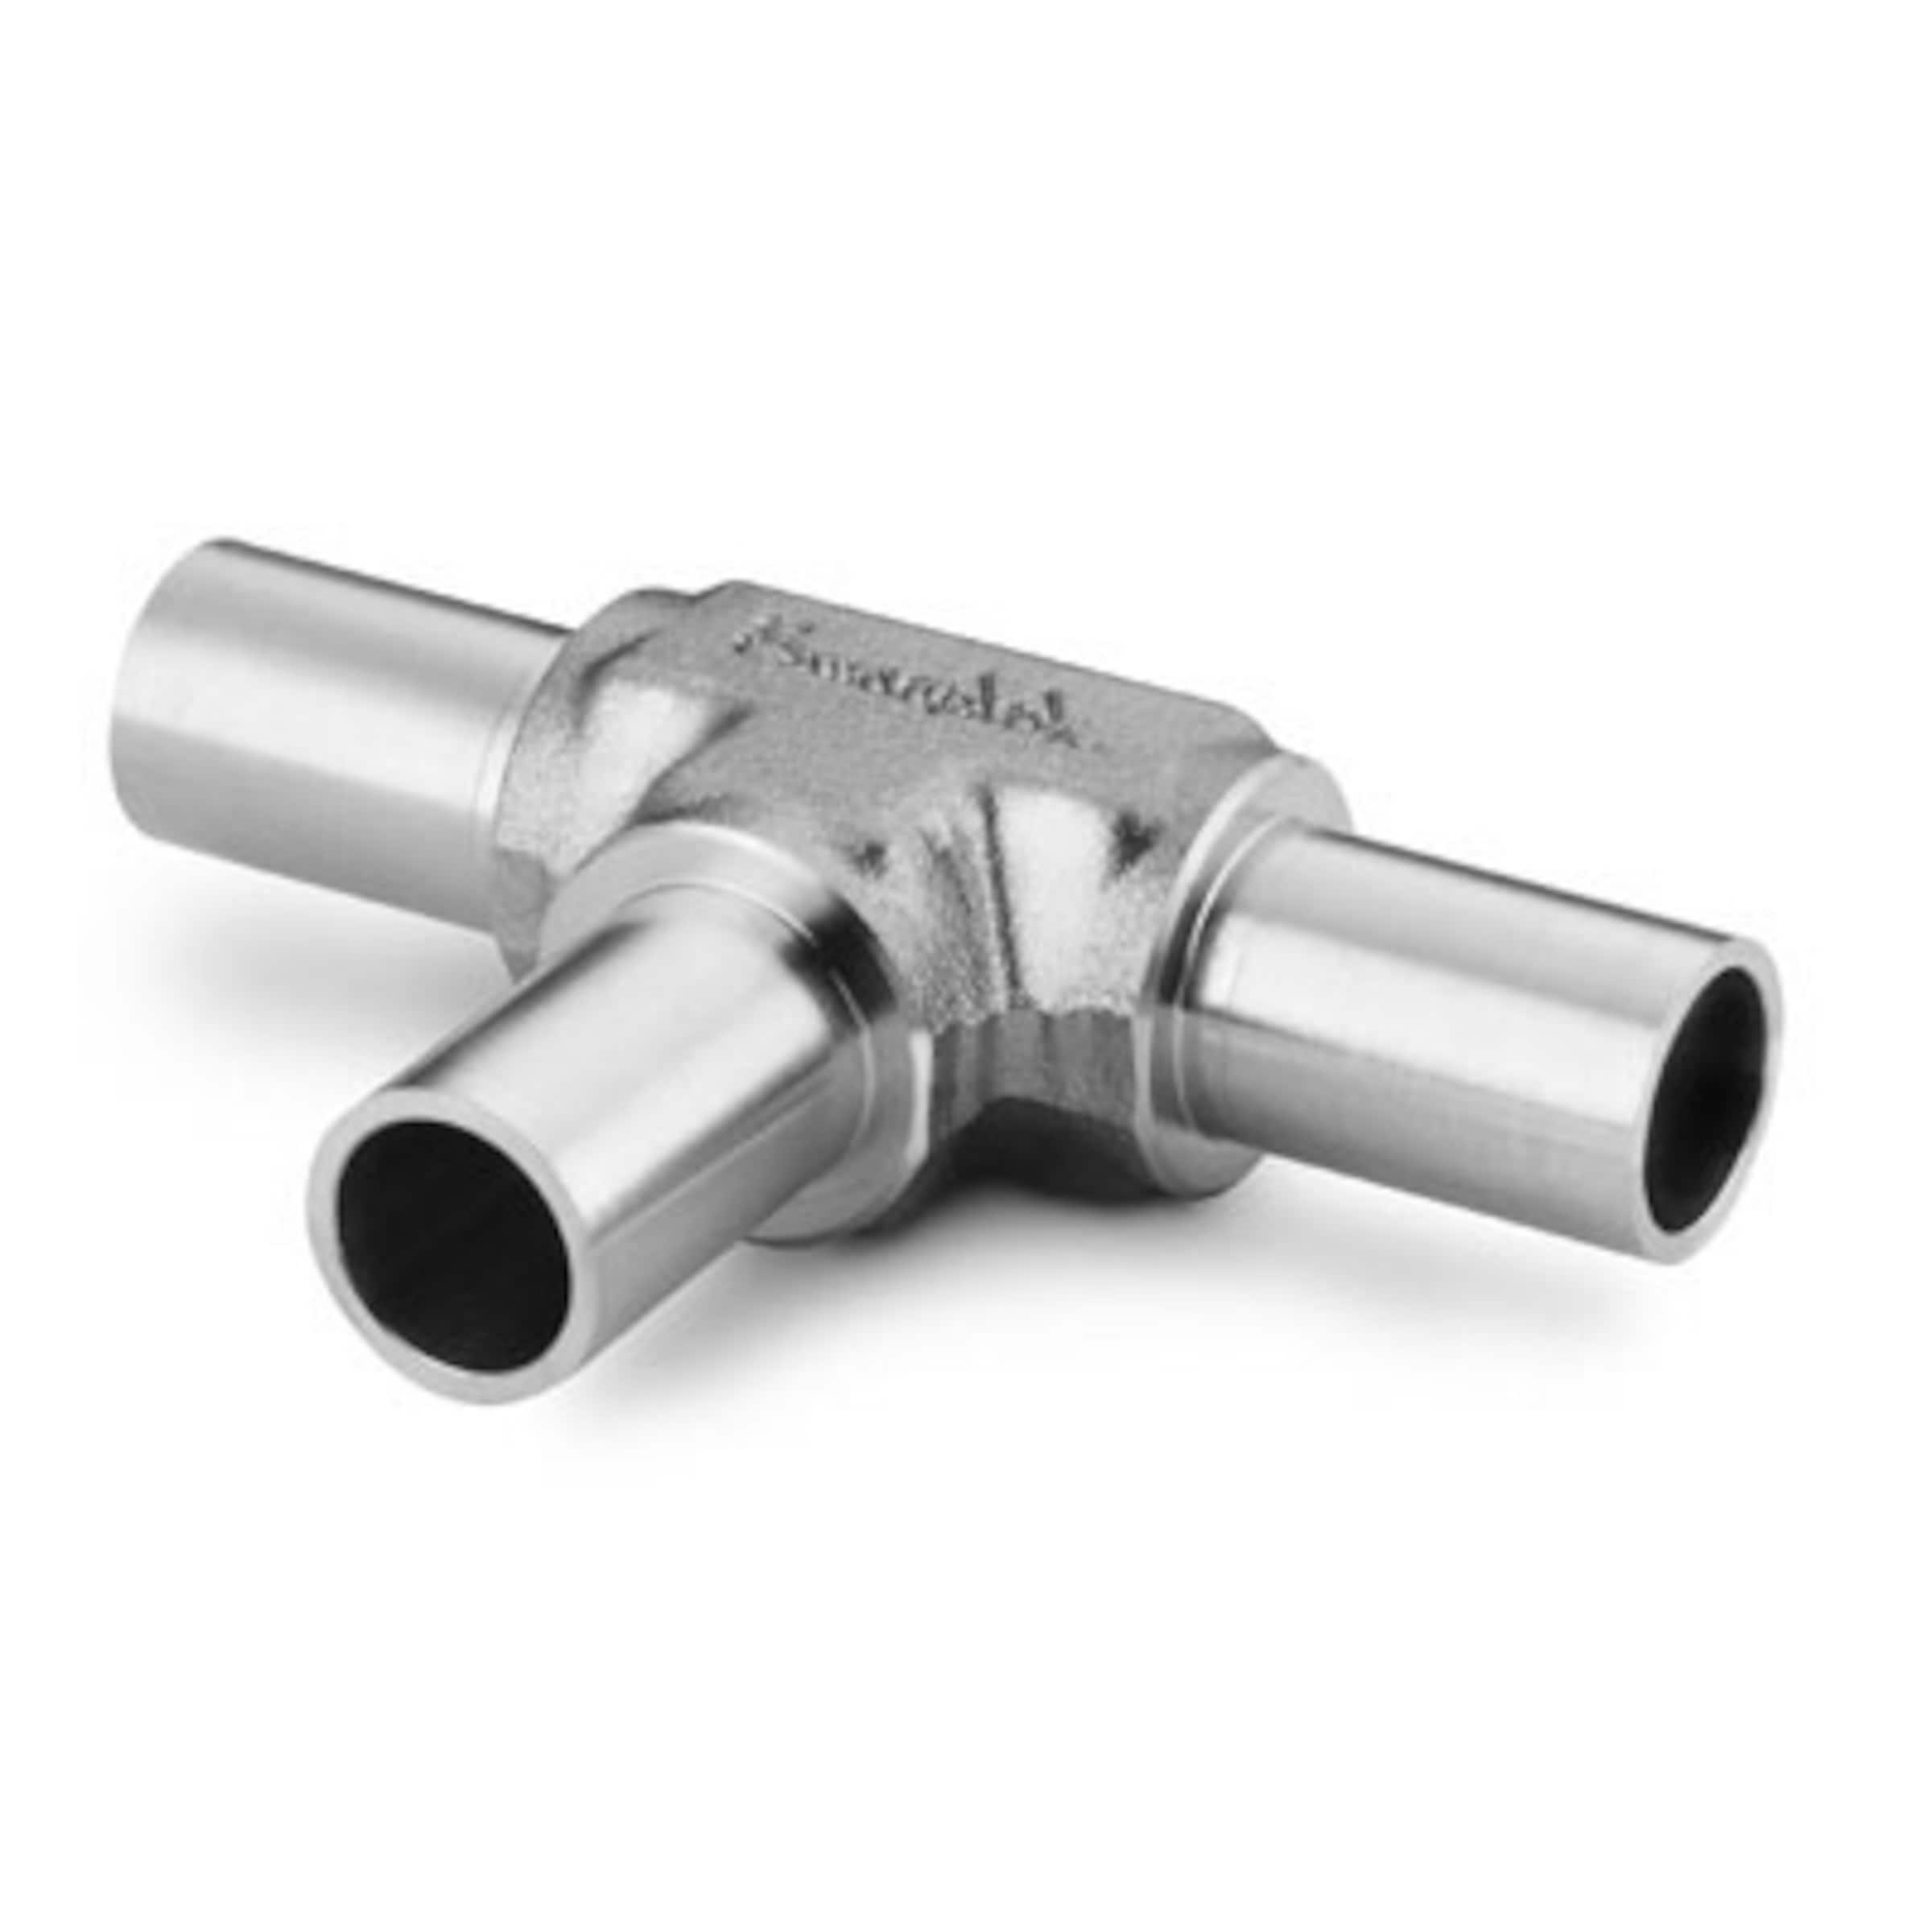 Tees | Butt Weld Fittings | Weld Fittings | Fittings | All Products ...